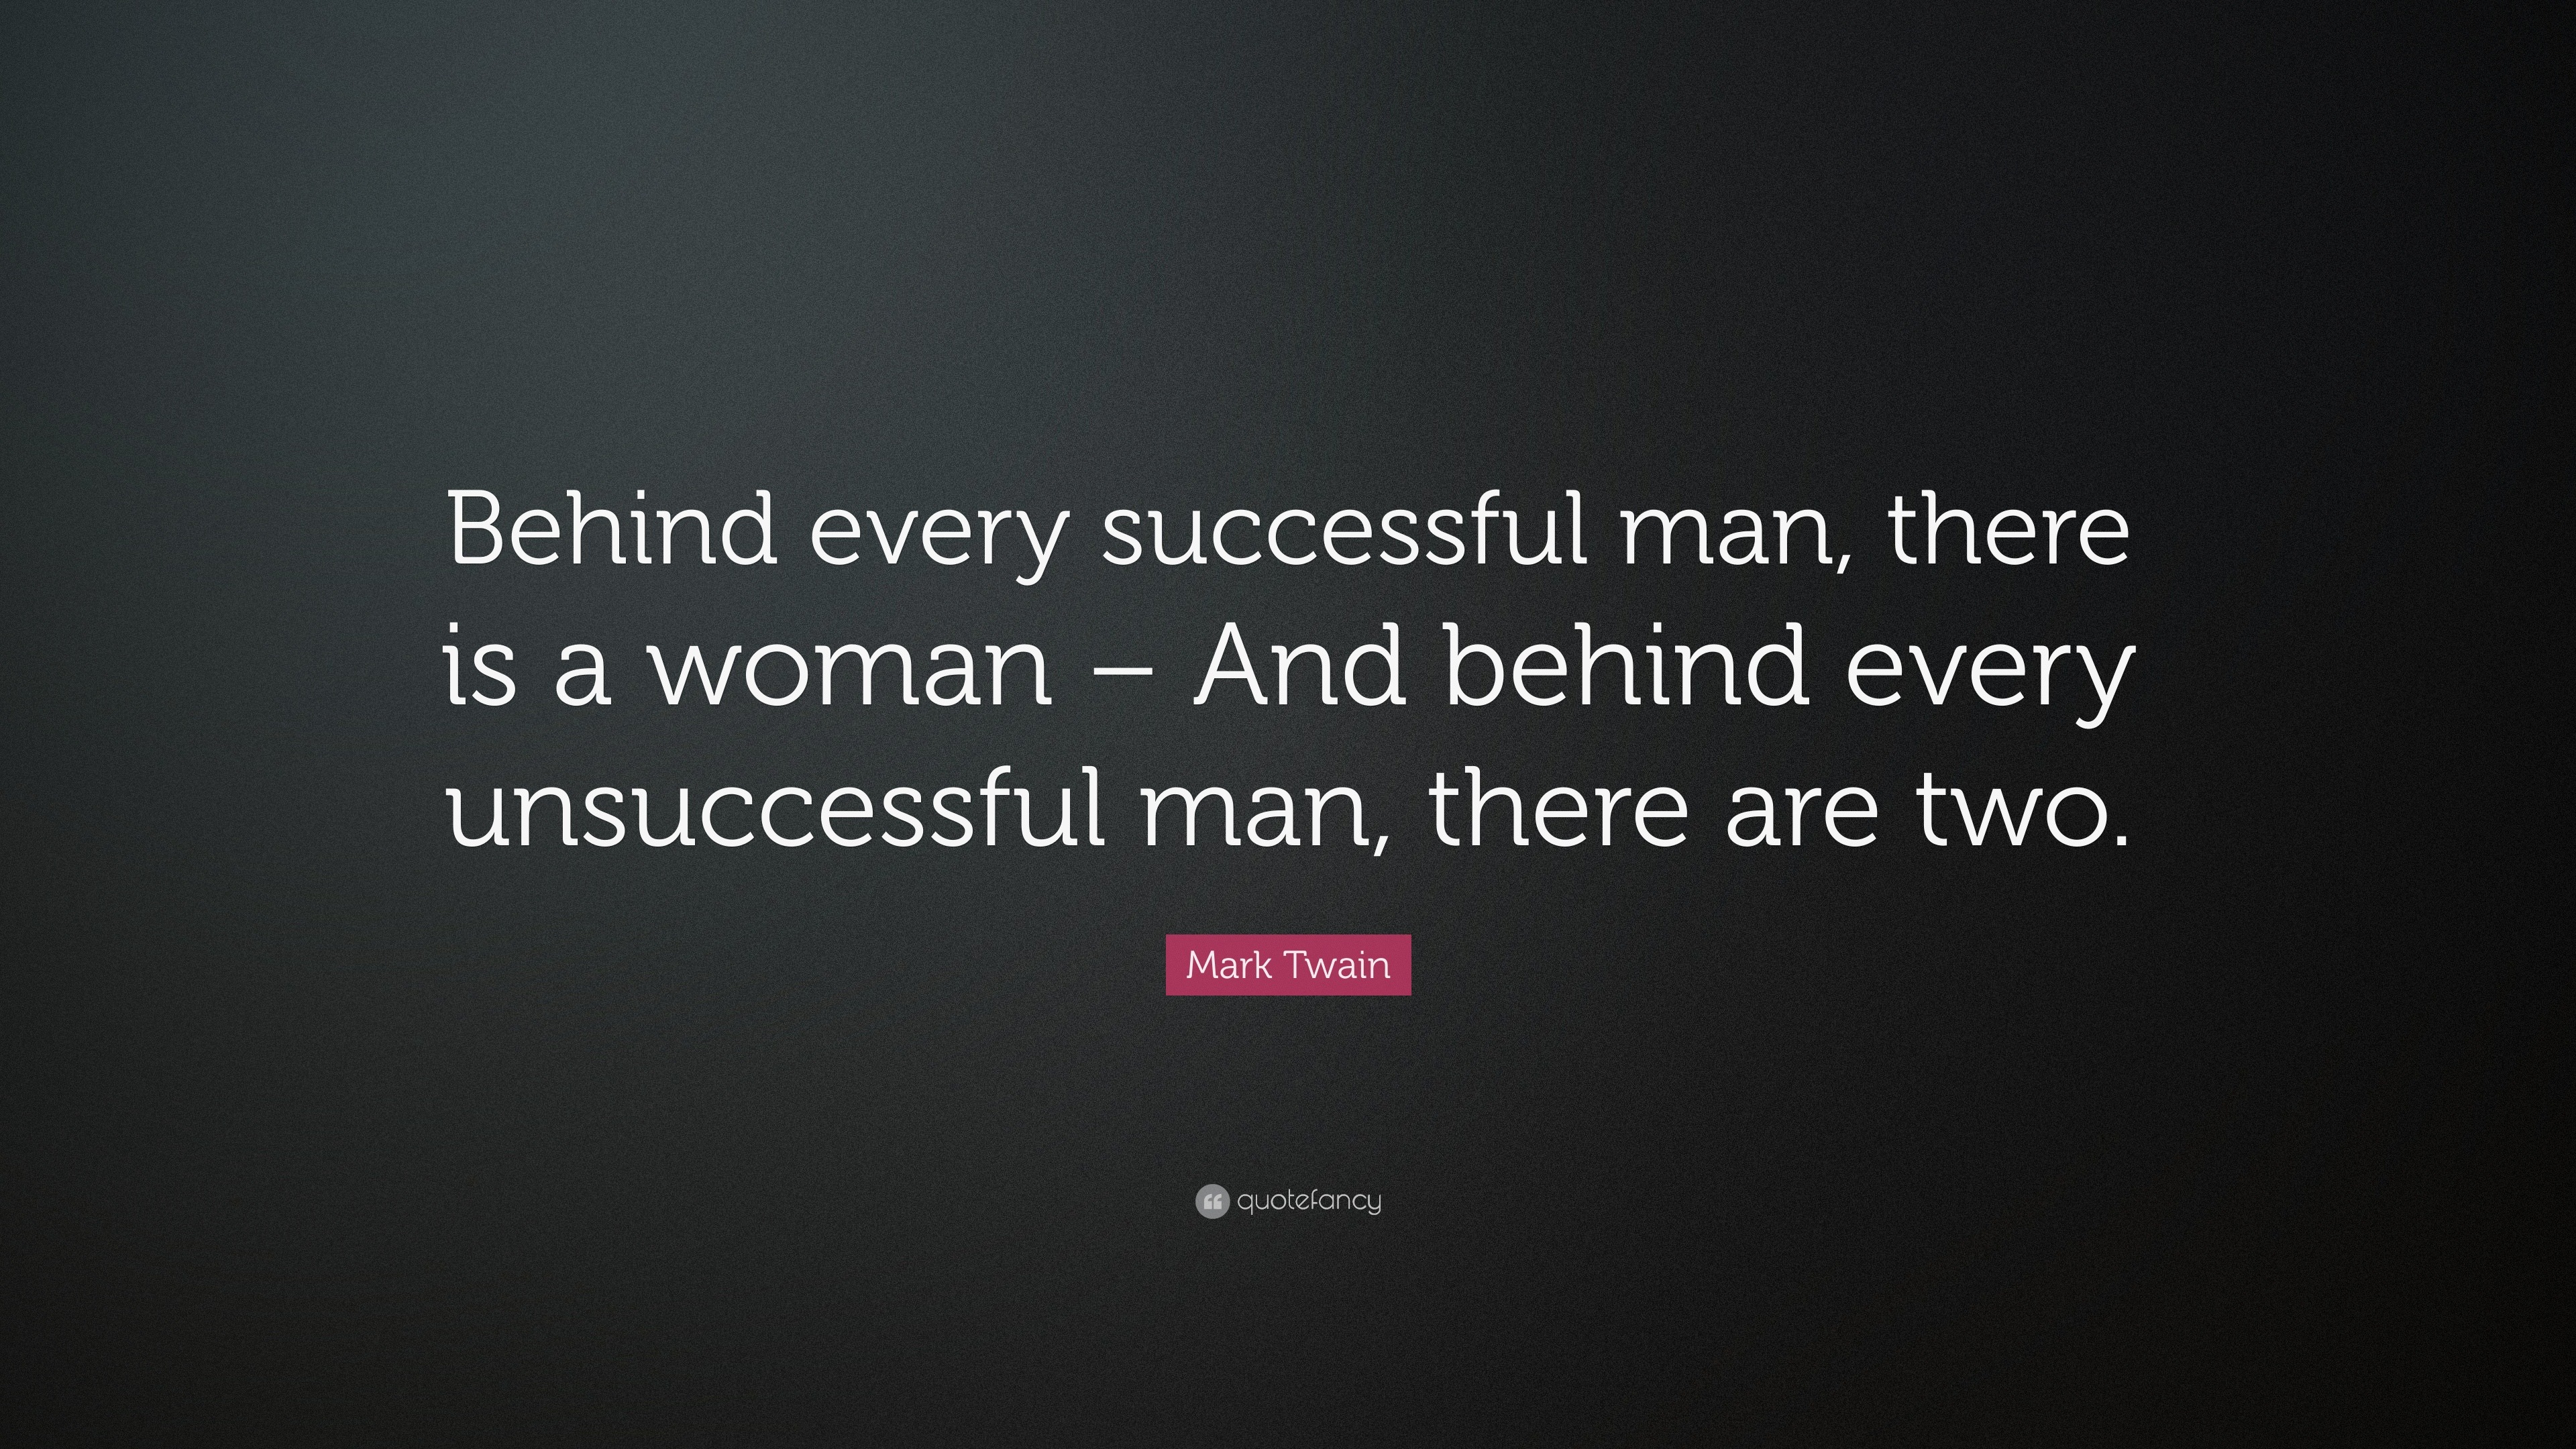 Mark Twain Quote Behind Every Successful Man There Is A Woman And Behind Every Unsuccessful Man